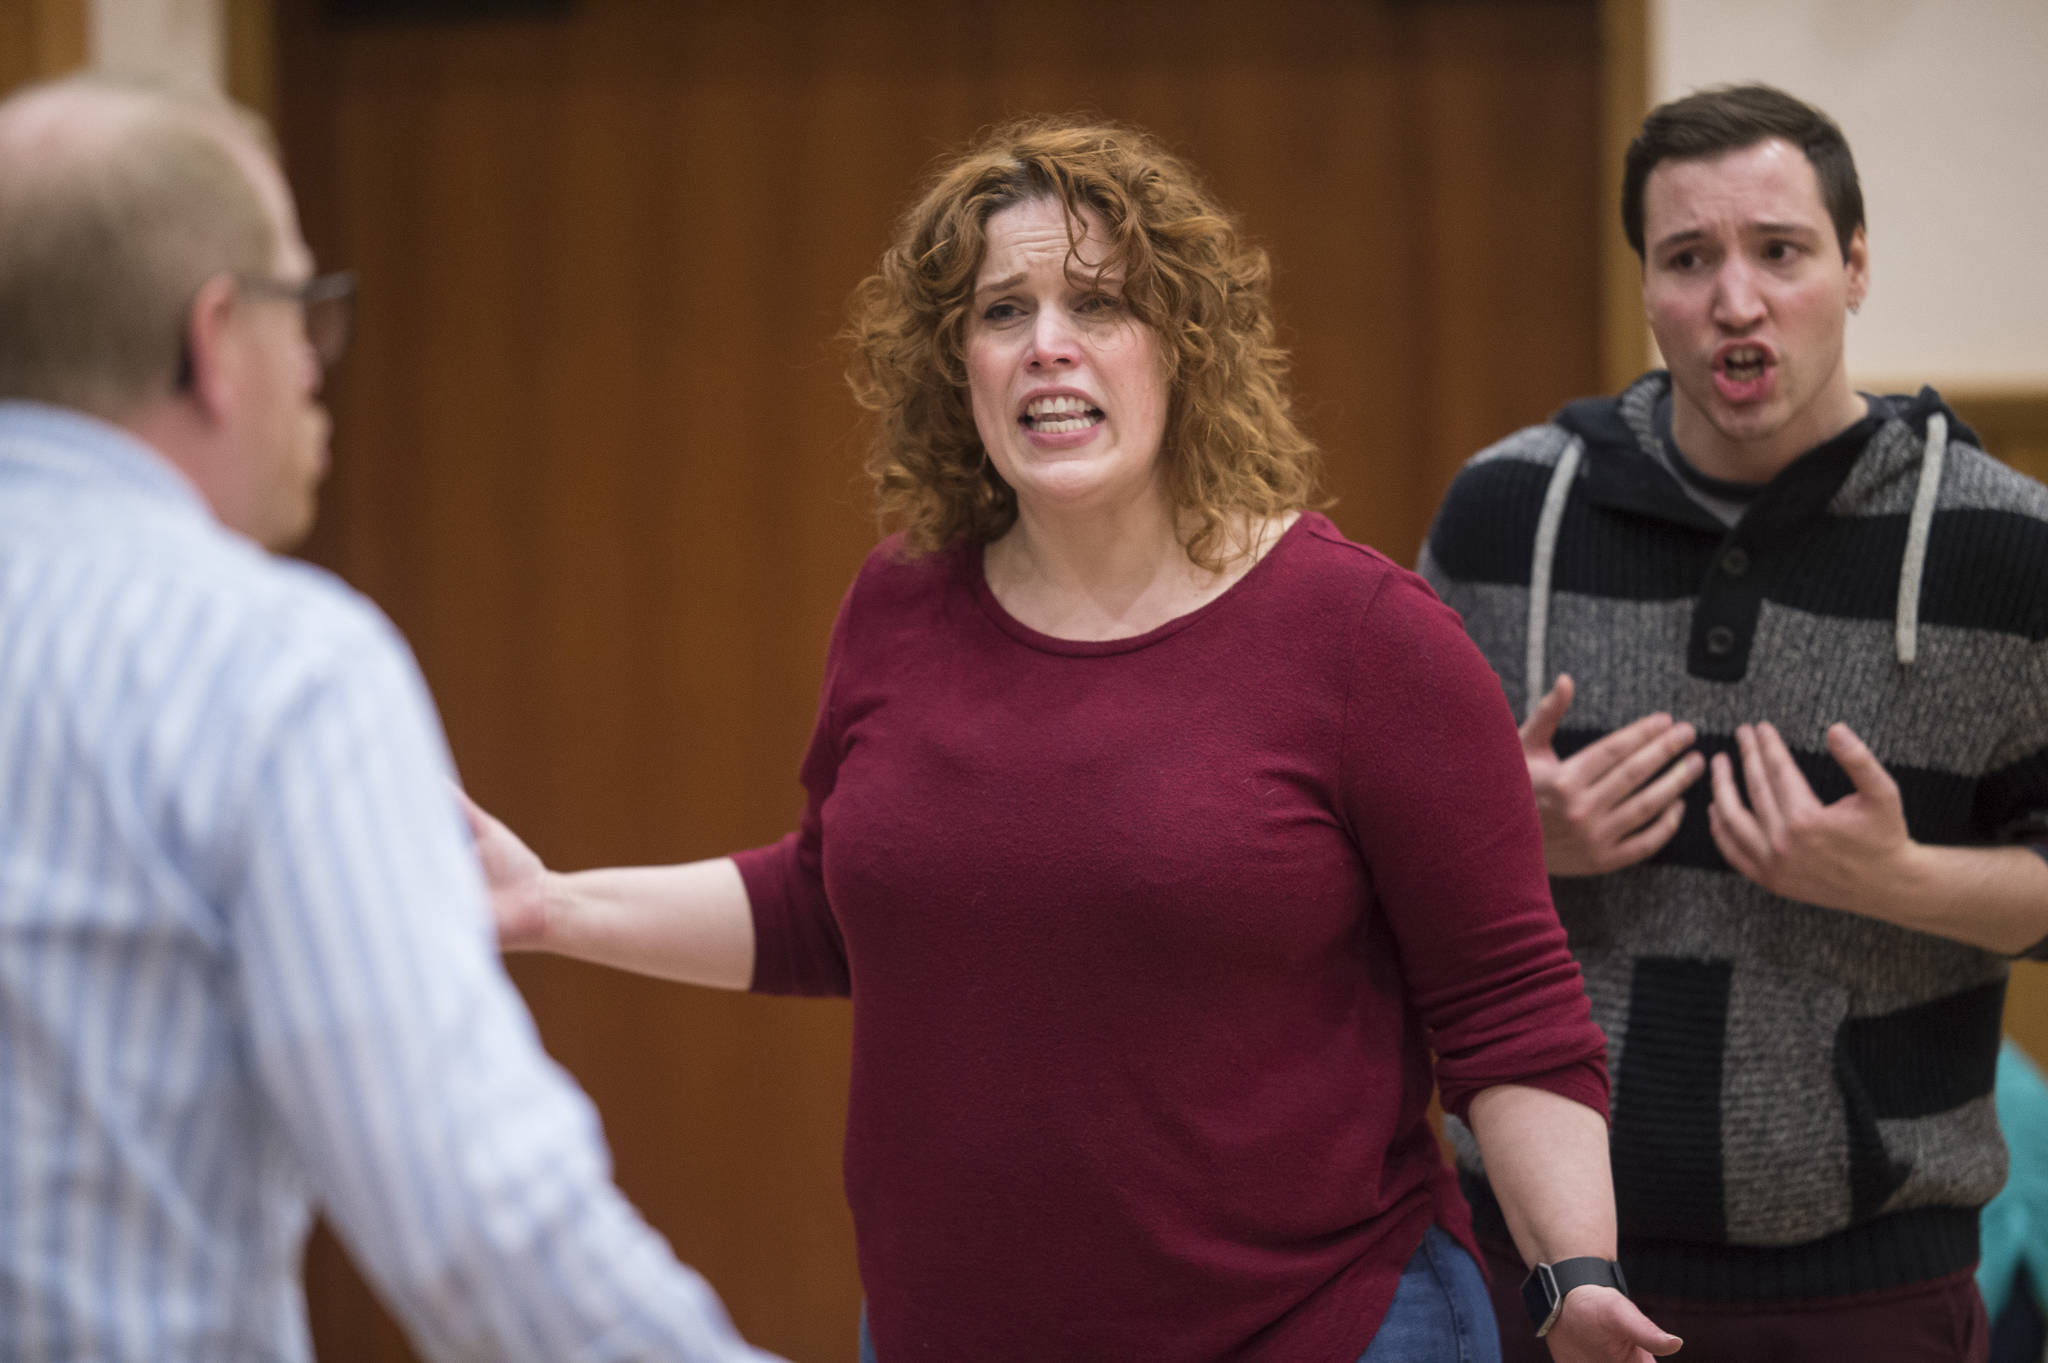 Dan, played by Chris Murray, left, Diana, played by Margeaux Ljungberg, center, and Gabe, played by Richard Carter, rehearse in Juneau Douglas Little Theatre’s production of “Next to Normal” at McPhetre’s Hall on Monday, Feb. 26, 2018. (Michael Penn | For the Capital City Weekly)